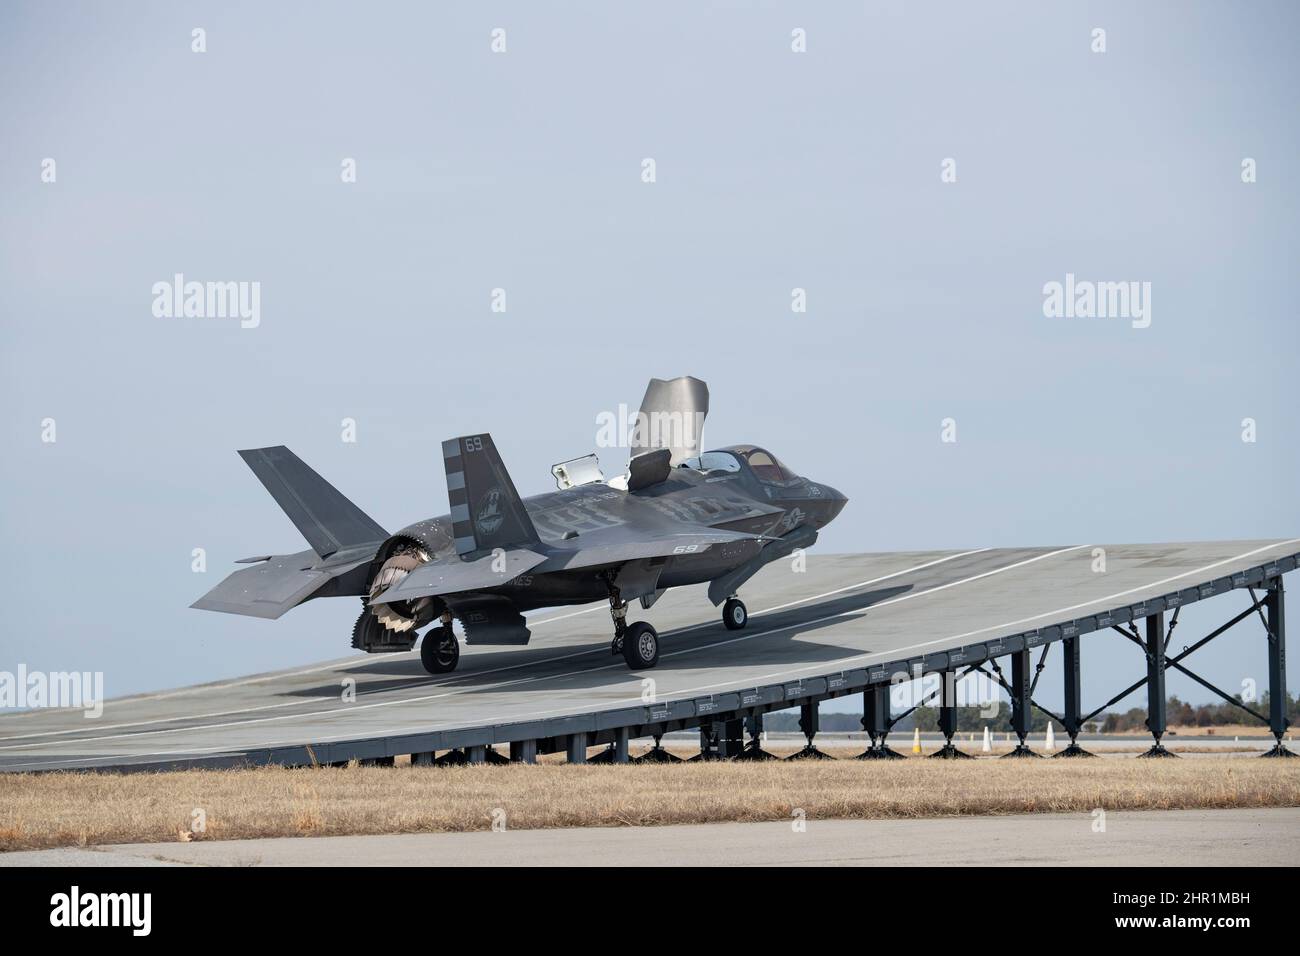 Marine Maj. Dylan “Bilbo” Nicholas, test pilot, performs a short takeoff launch from a land-based ski jump in an F-35B Lightning II aircraft from the Patuxent River F-35 Integrated Test Force (ITF) at Naval Air Station Patuxent River, Md., Feb. 16, 2022. Flying the short takeoff vertical landing (STOVL) variant of the 5th generation fighter, Nicholas was participating in STOVL operations training for the combined test team – aircrew and flight test control room engineers. The Pax River ITF’s mission is to effectively plan, coordinate, and conduct safe, secure, and efficient flight test for F-3 Stock Photo